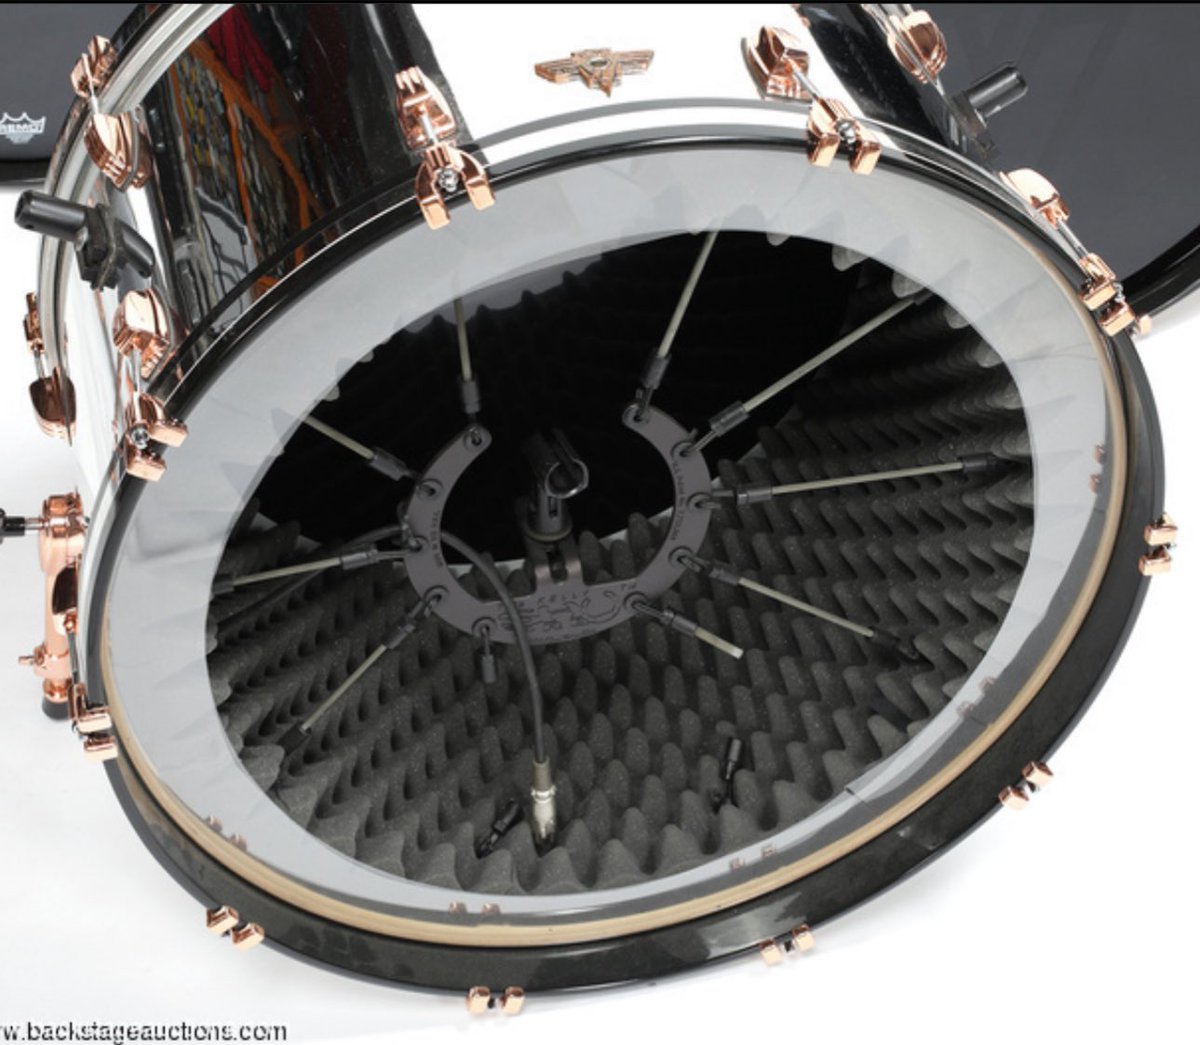 If you ever wondered what the purpose of the “front” bass drums on Alex Van Halen’s drum kits from the 2012 and 2015 tours was, besides visuals, its actual purpose was to house the microphones that capture the resonant head of his main kick drum. This is essential to the AVH